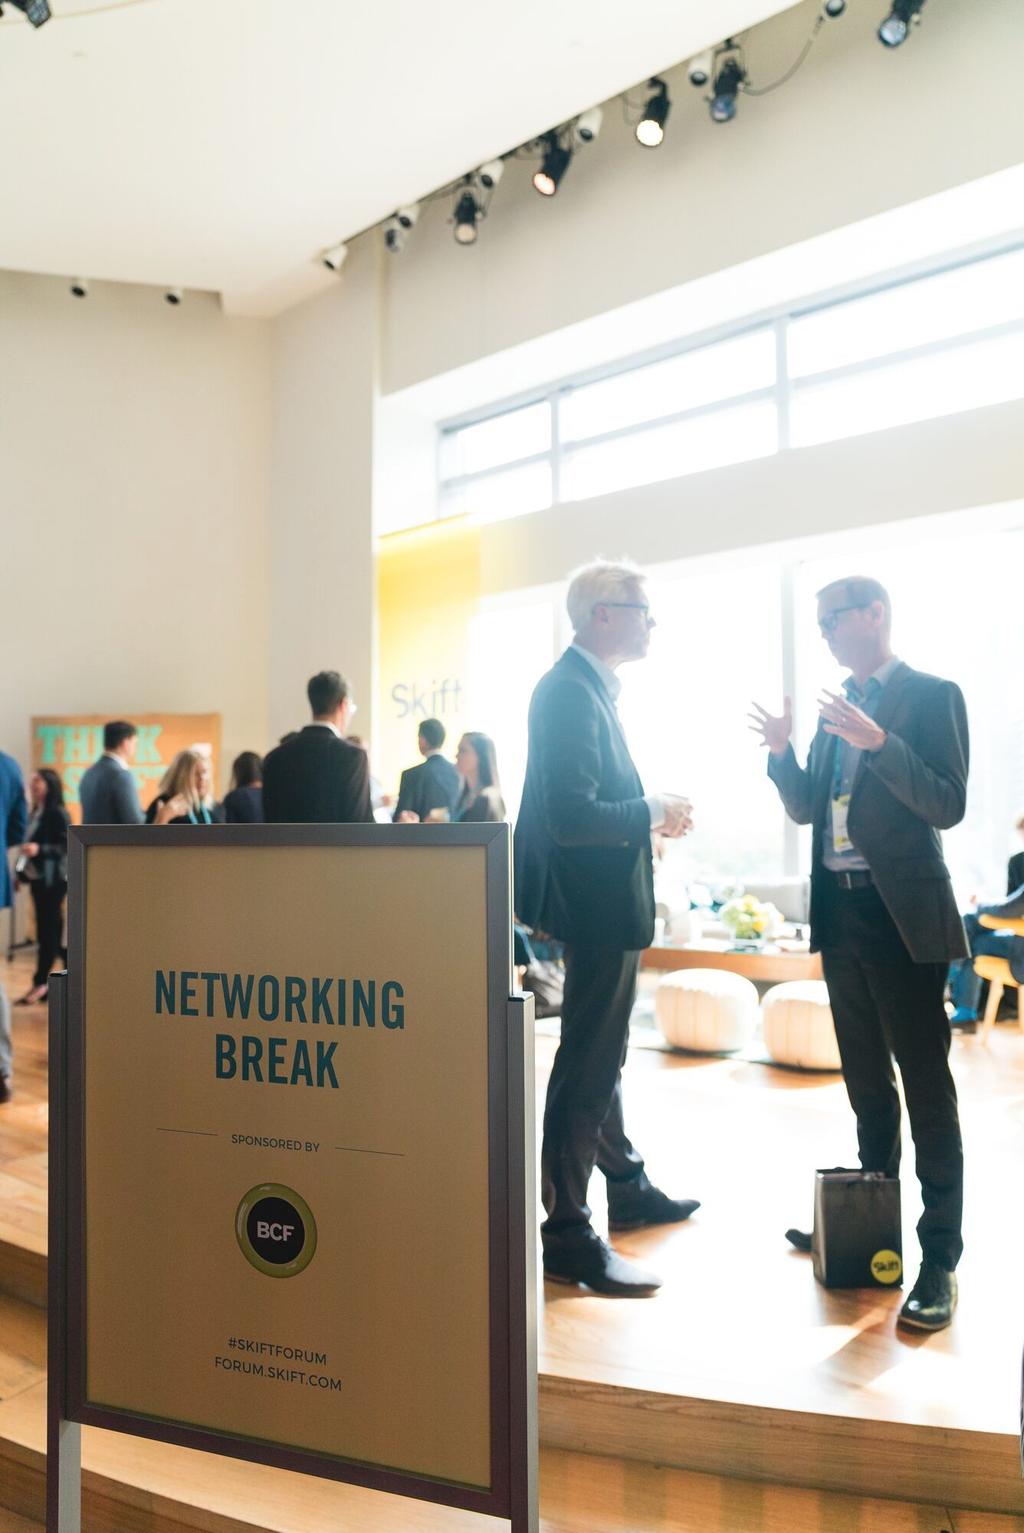 As the networking sponsor you will enable Skift Global Forum attendees to do what they love to do most: connect during the breaks.